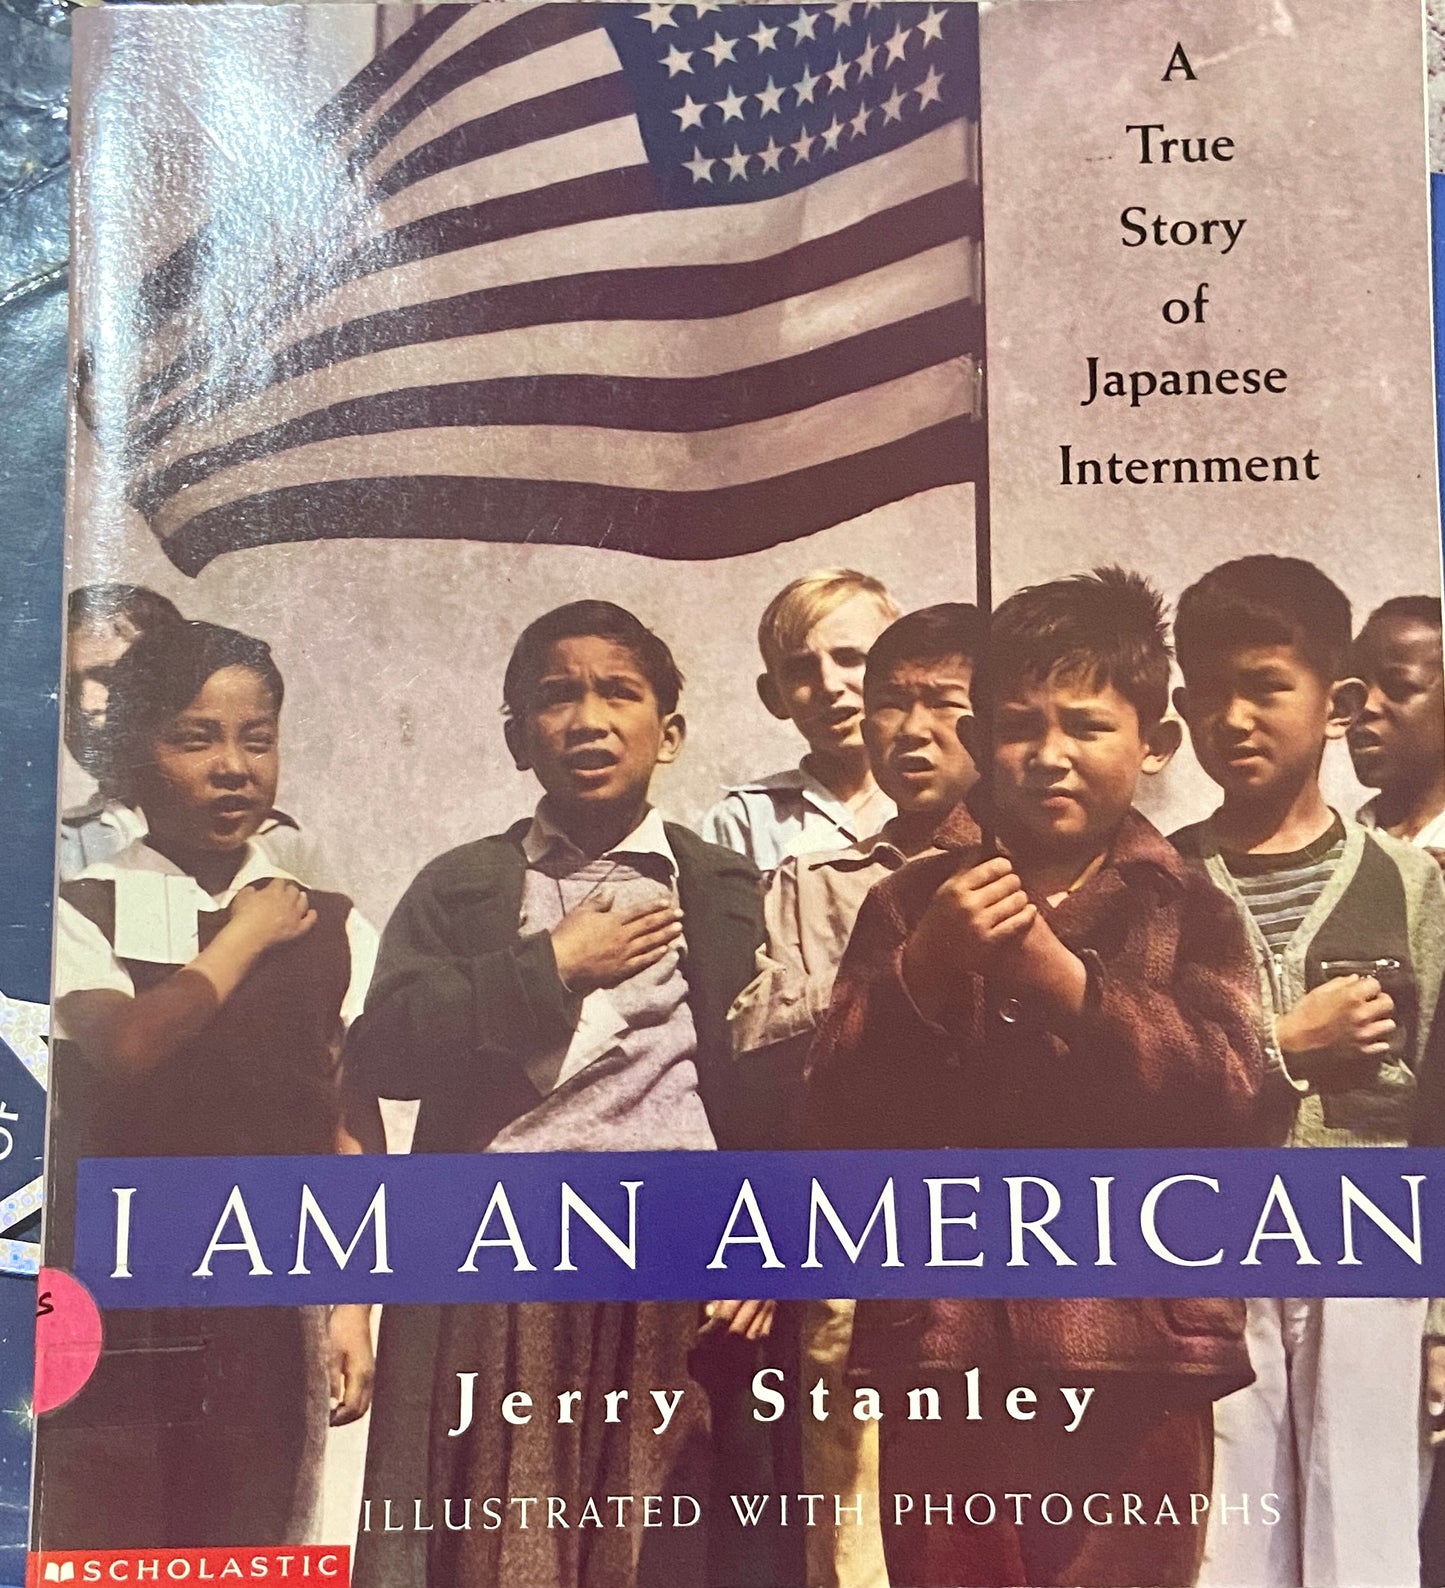 I am an American by Jerry Stanley  Half Price Books India Books inspire-bookspace.myshopify.com Half Price Books India